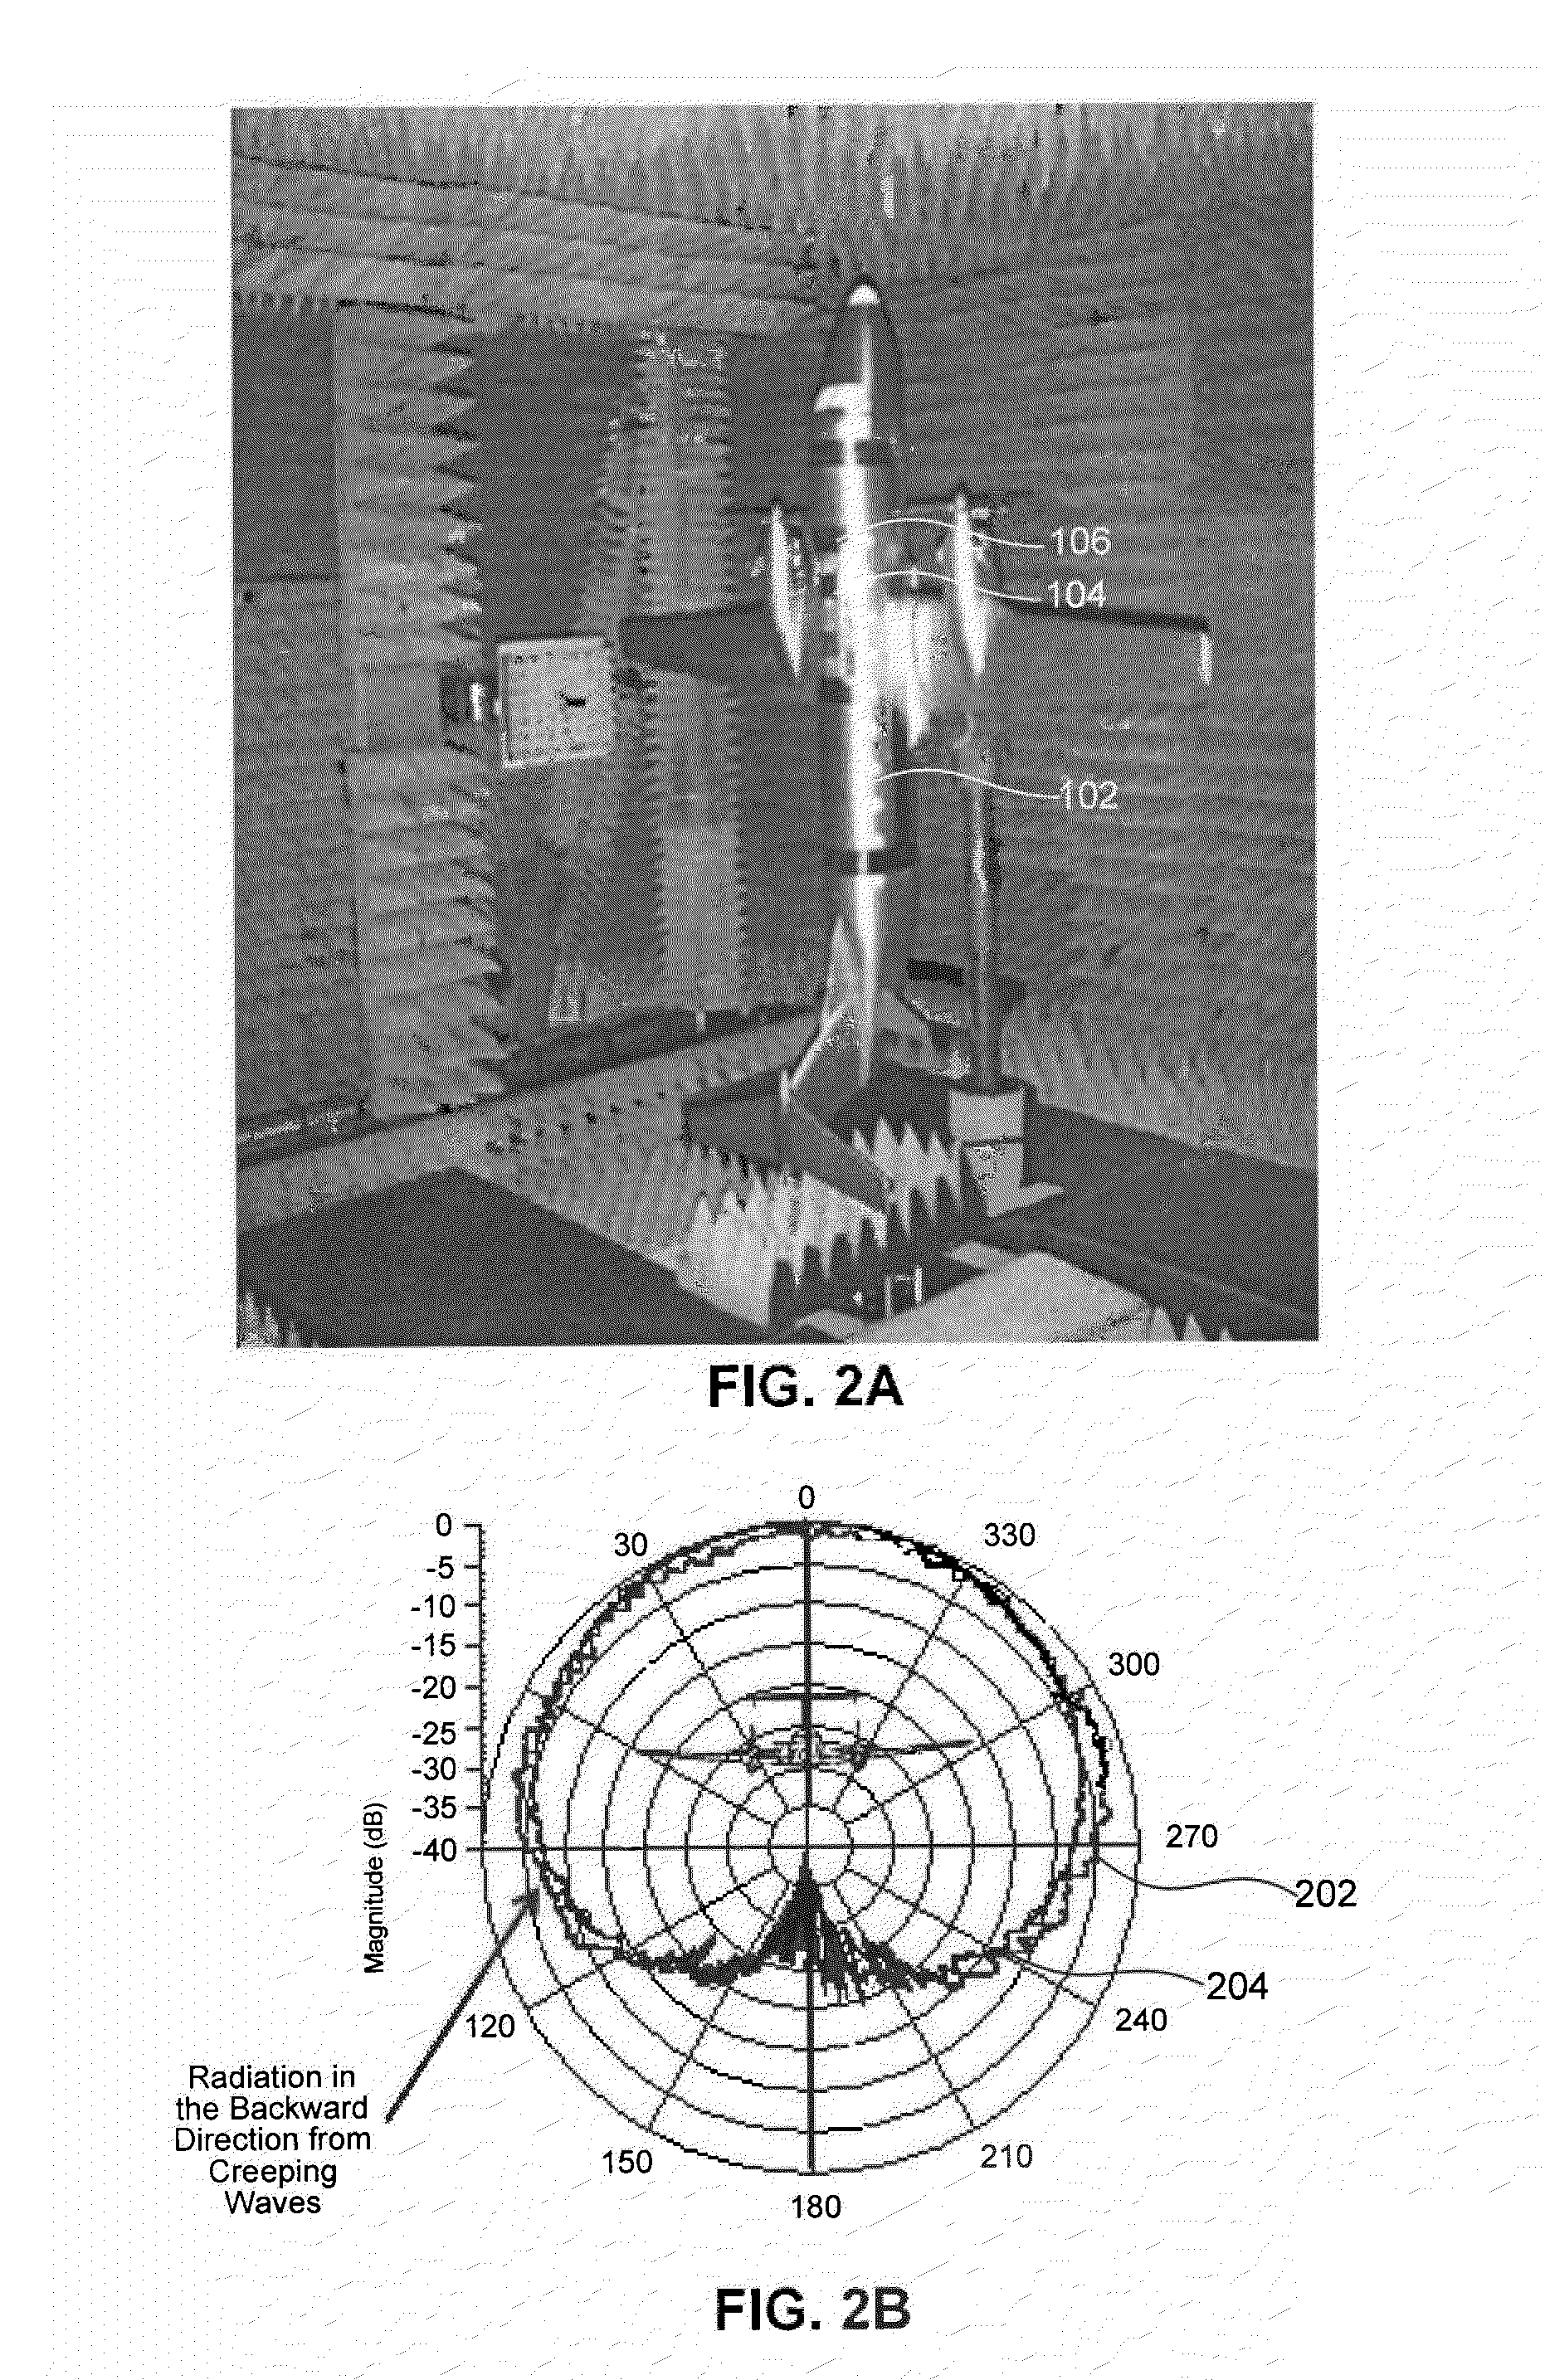 Conformal Electro-Textile Antenna and Electronic Band Gap Ground Plane for Suppression of Back Radiation From GPS Antennas Mounted on Aircraft